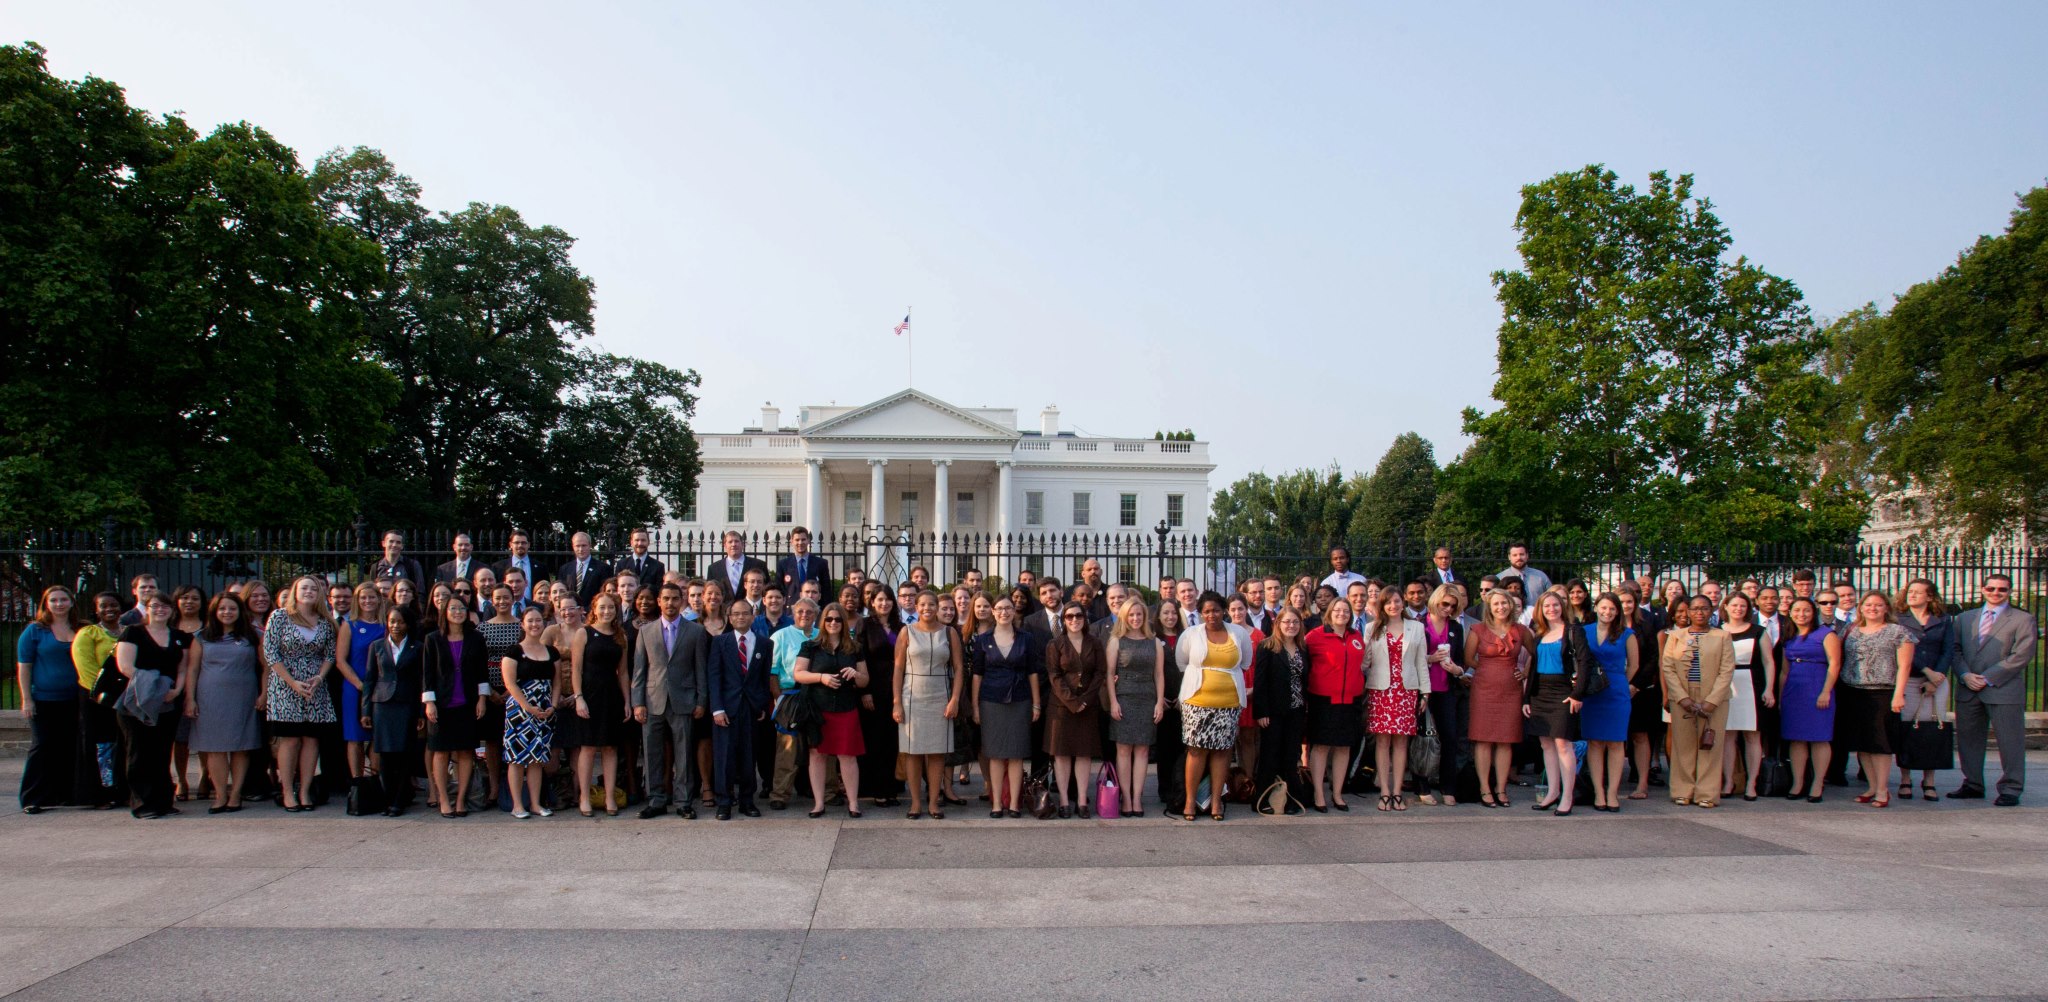 Download this Friday August The White House Weled Americorps Alumni picture